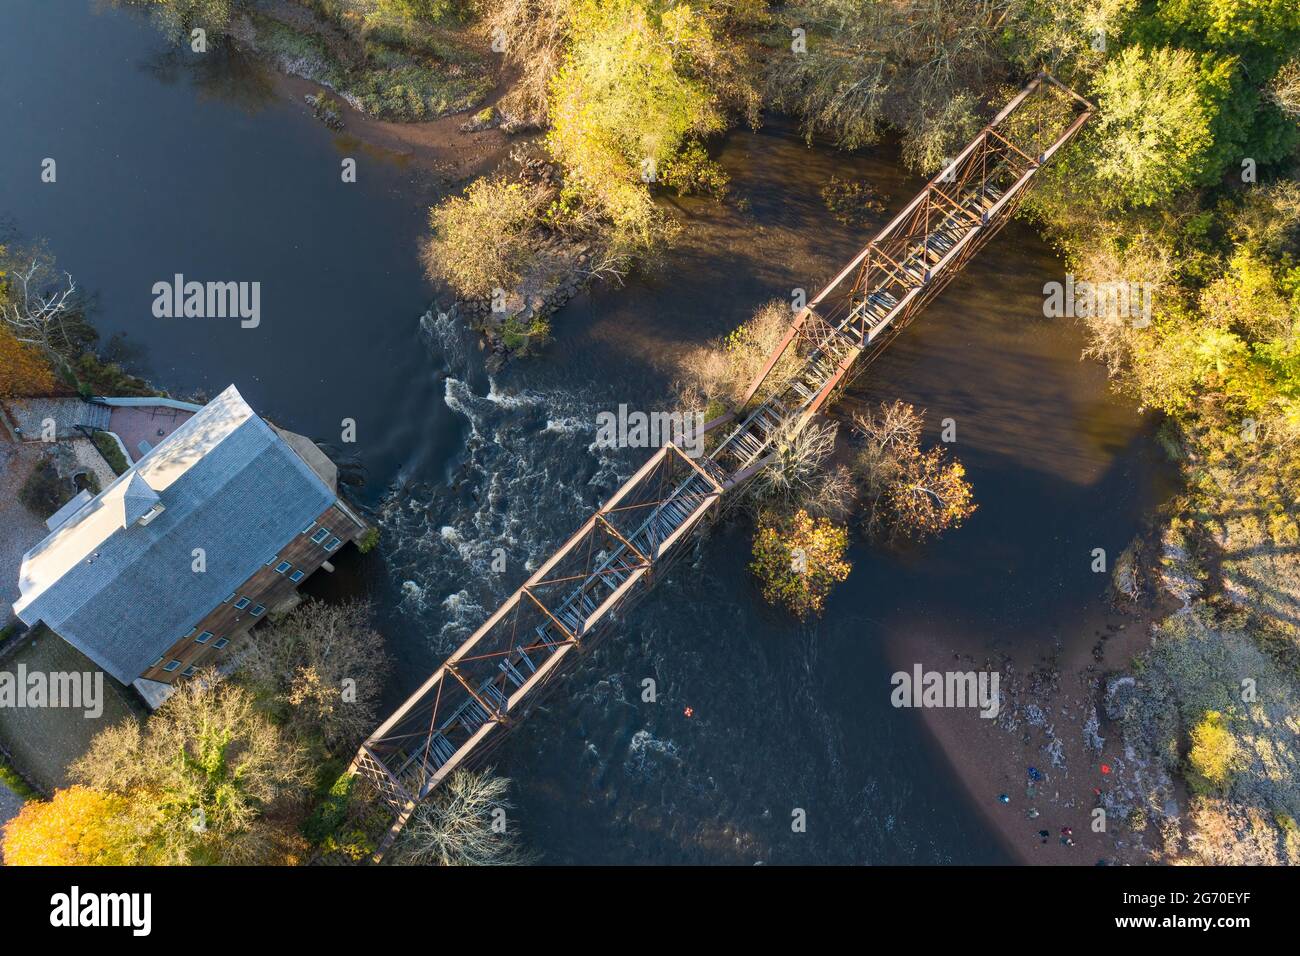 Aerial of the roof of an old, abandoned mill on a river in New Jersey with train tracks over the river, in Autumn. Stock Photo